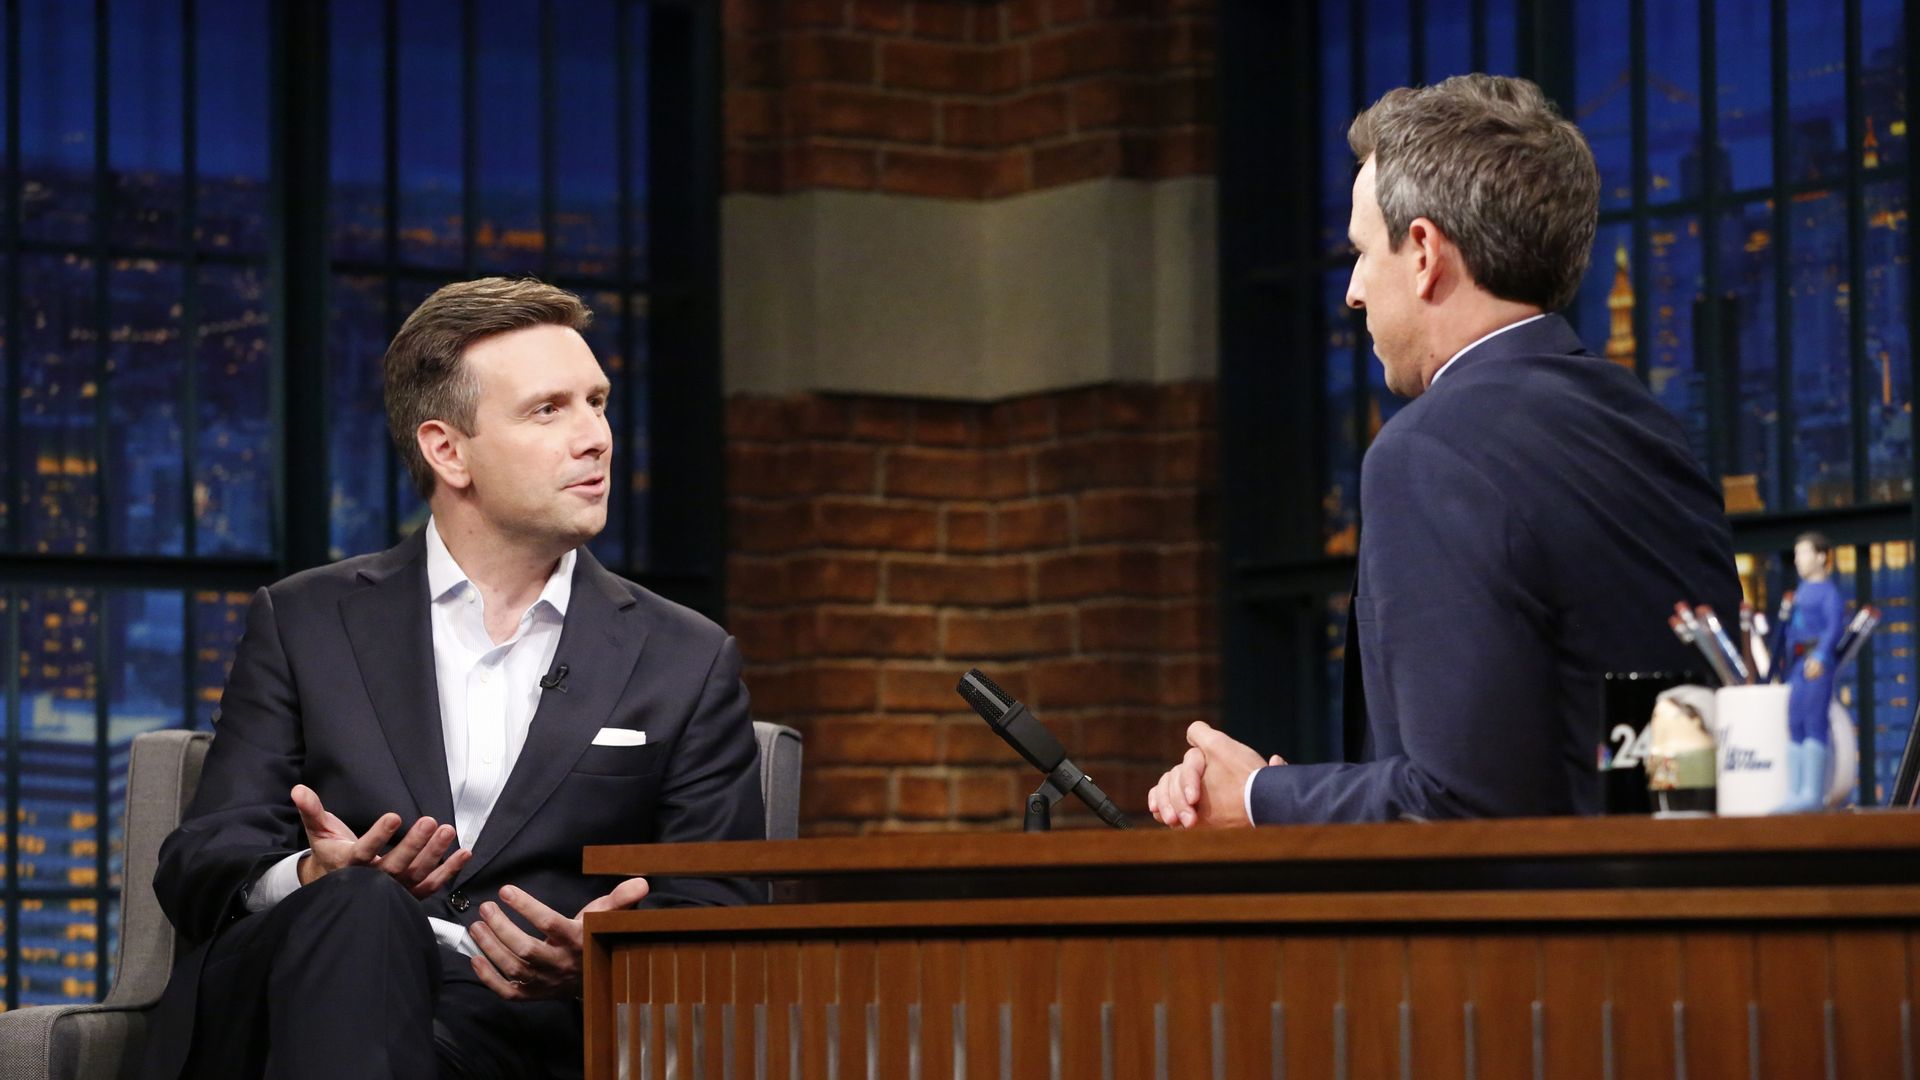 Earnest faces Meyers on the set of the talk show